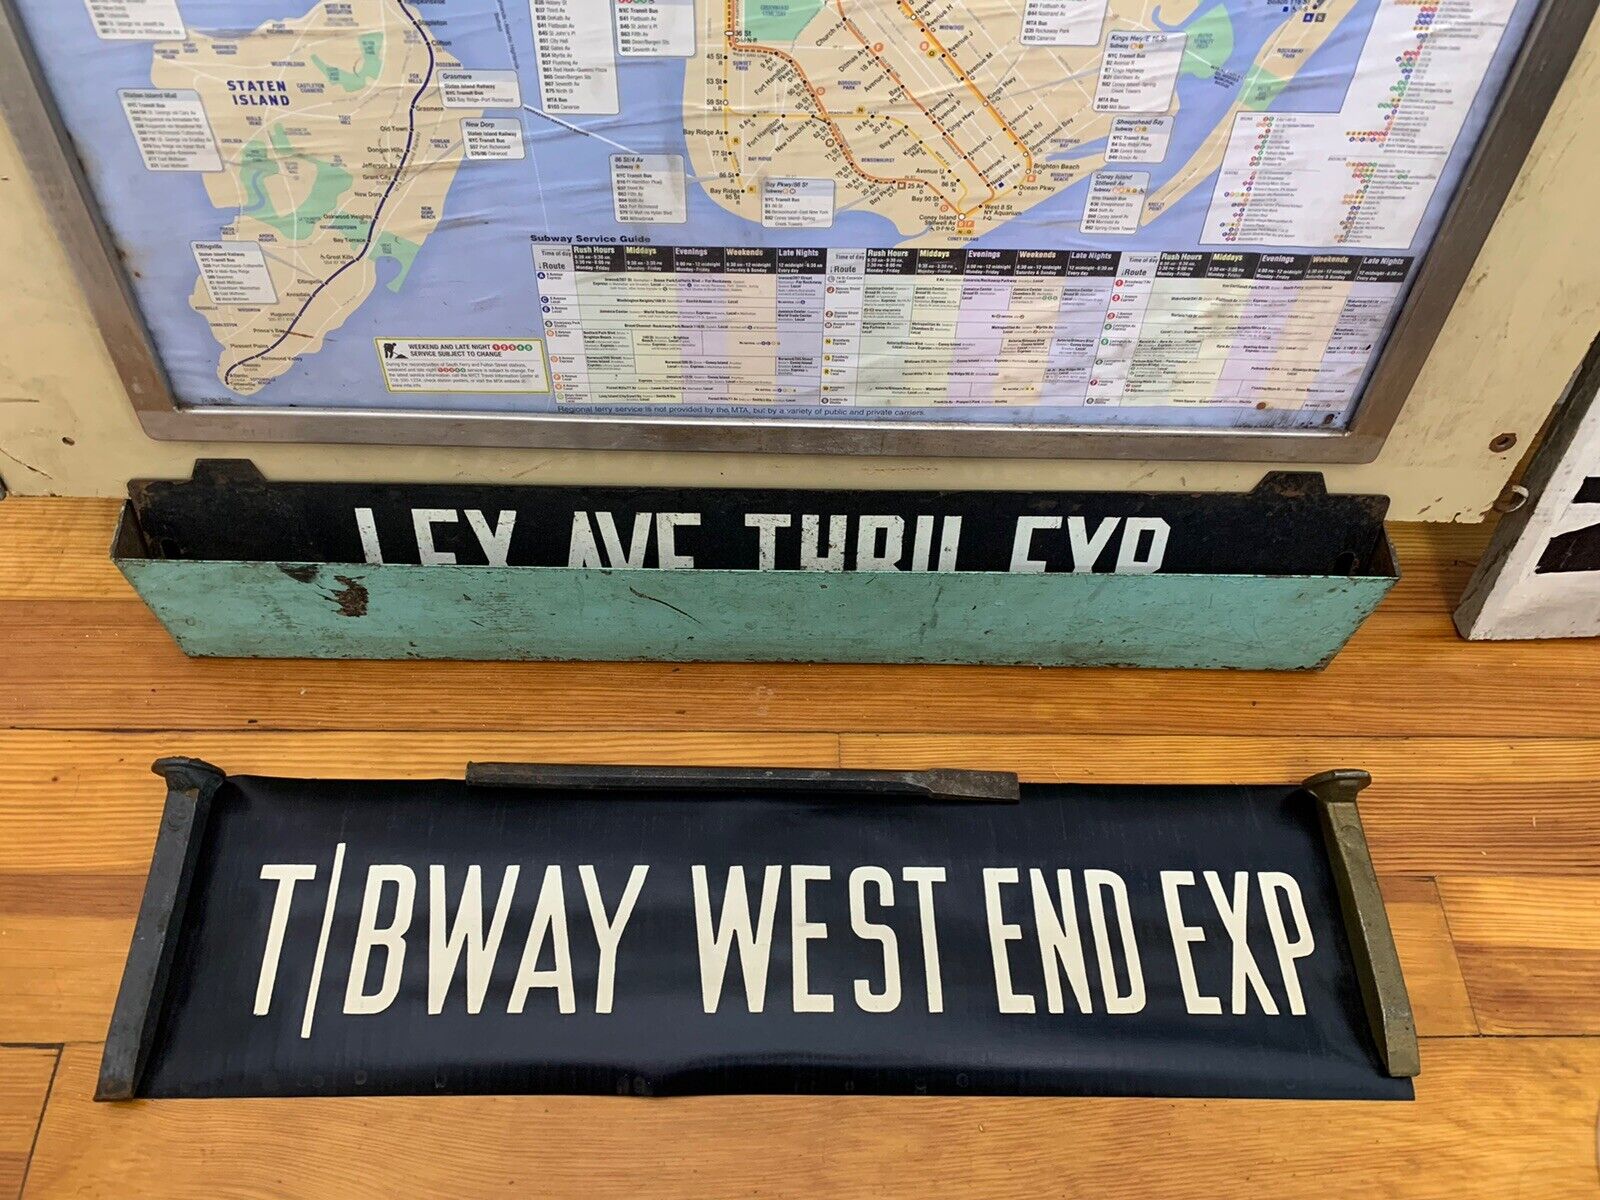 1961 NY NYC SUBWAY ROLL SIGN T BROADWAY WEST END EXPRESS CONEY ISLAND CHAMBERS